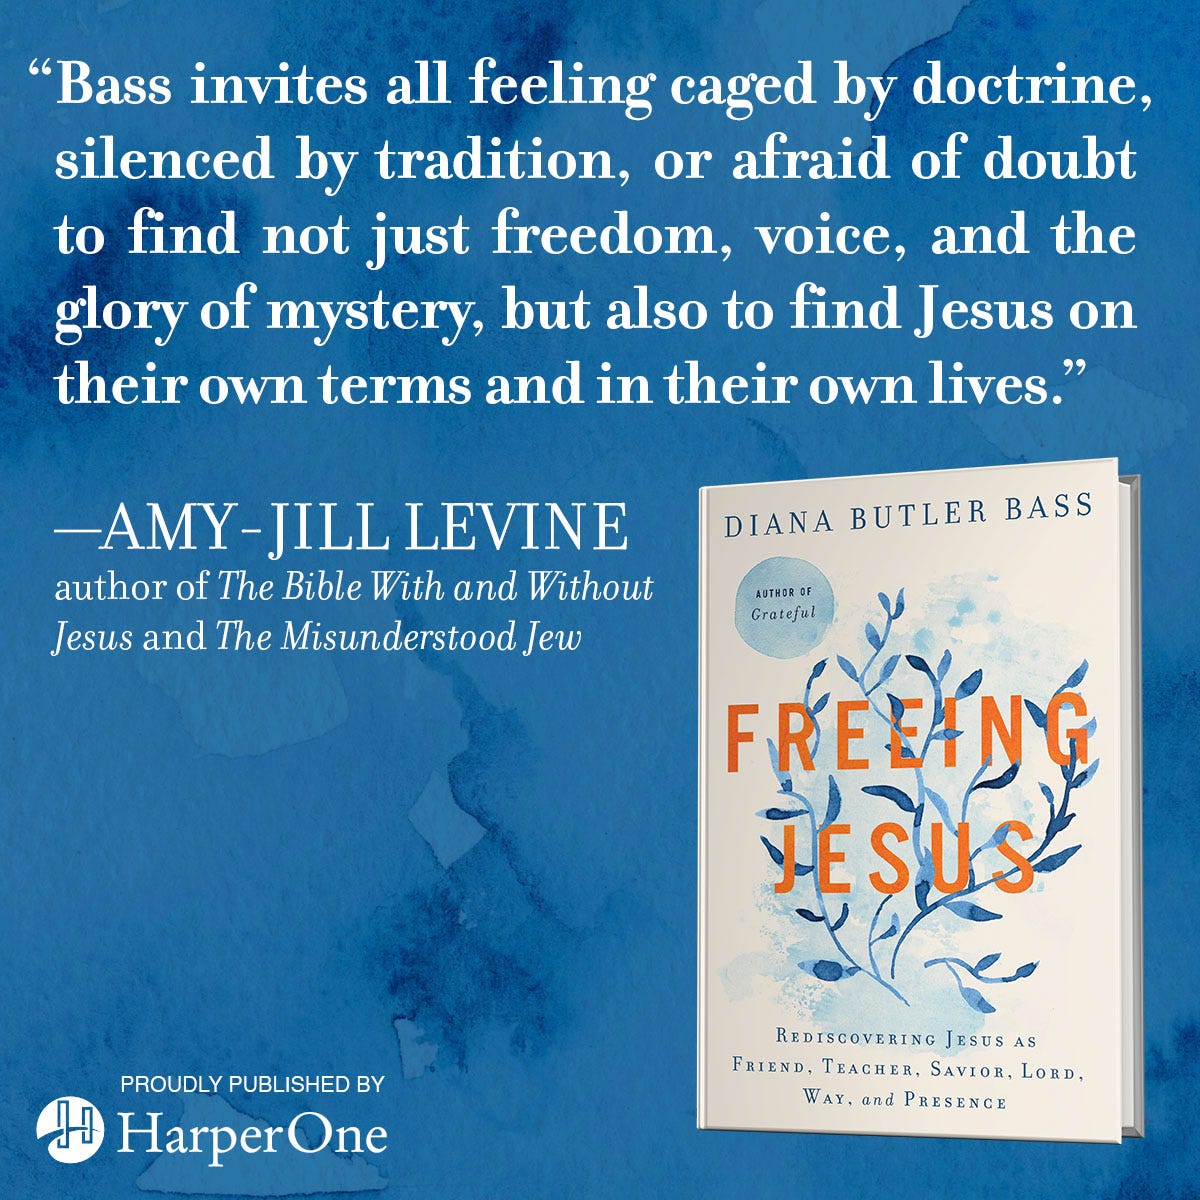 FREEING JESUS - by Diana Butler Bass - The Cottage